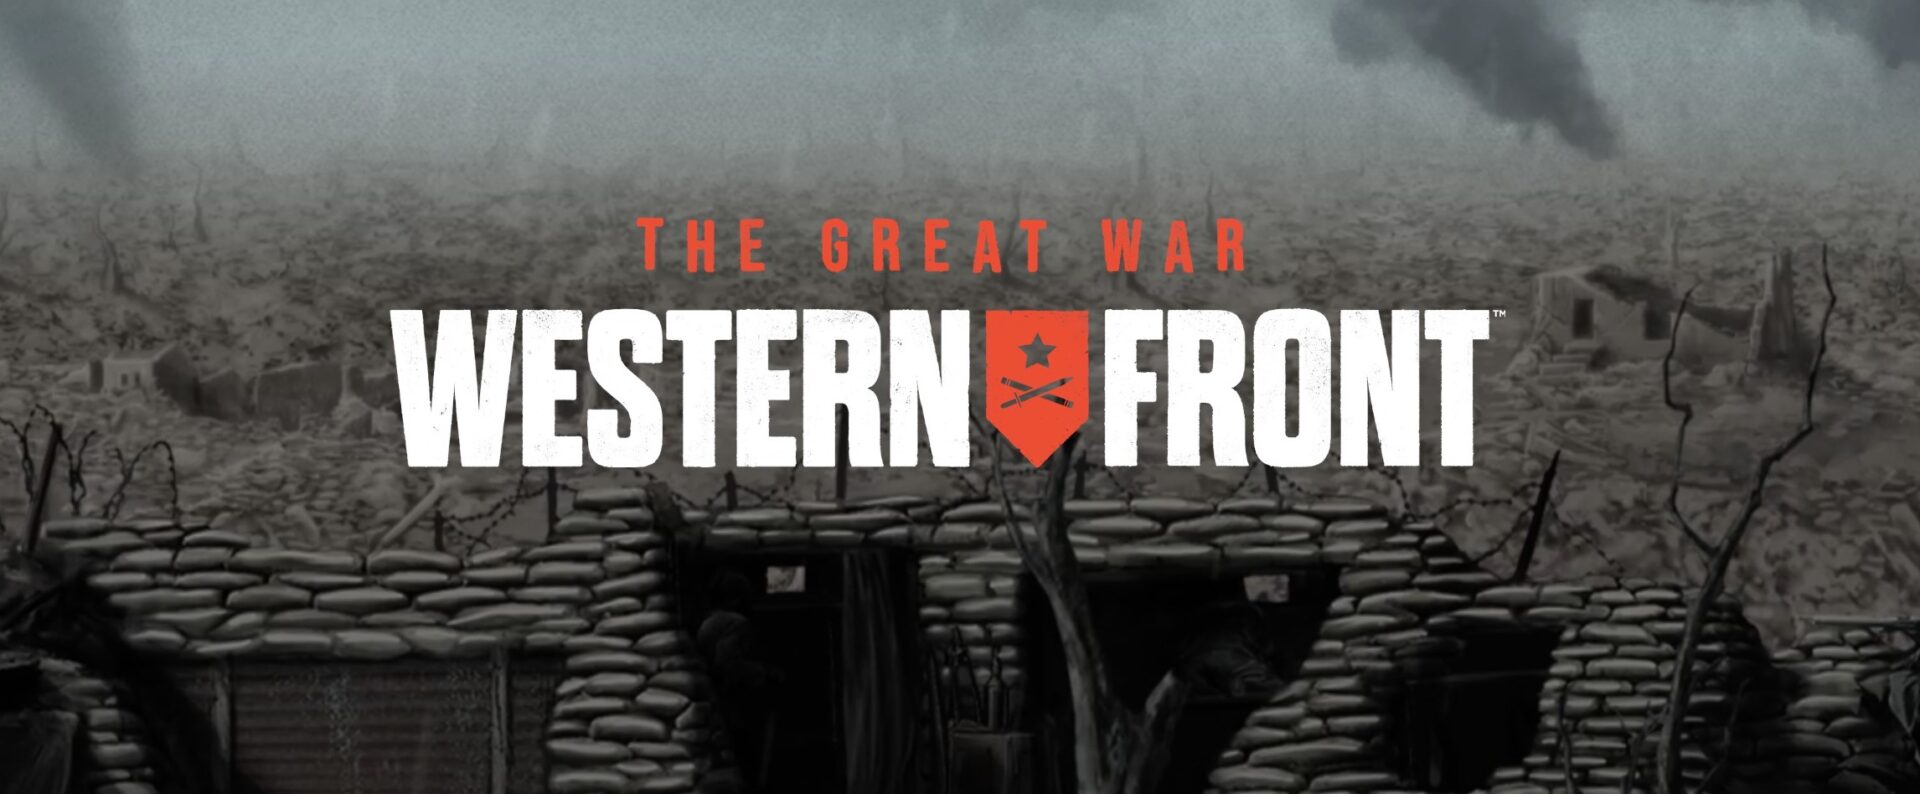 The Great War Western Front ar1